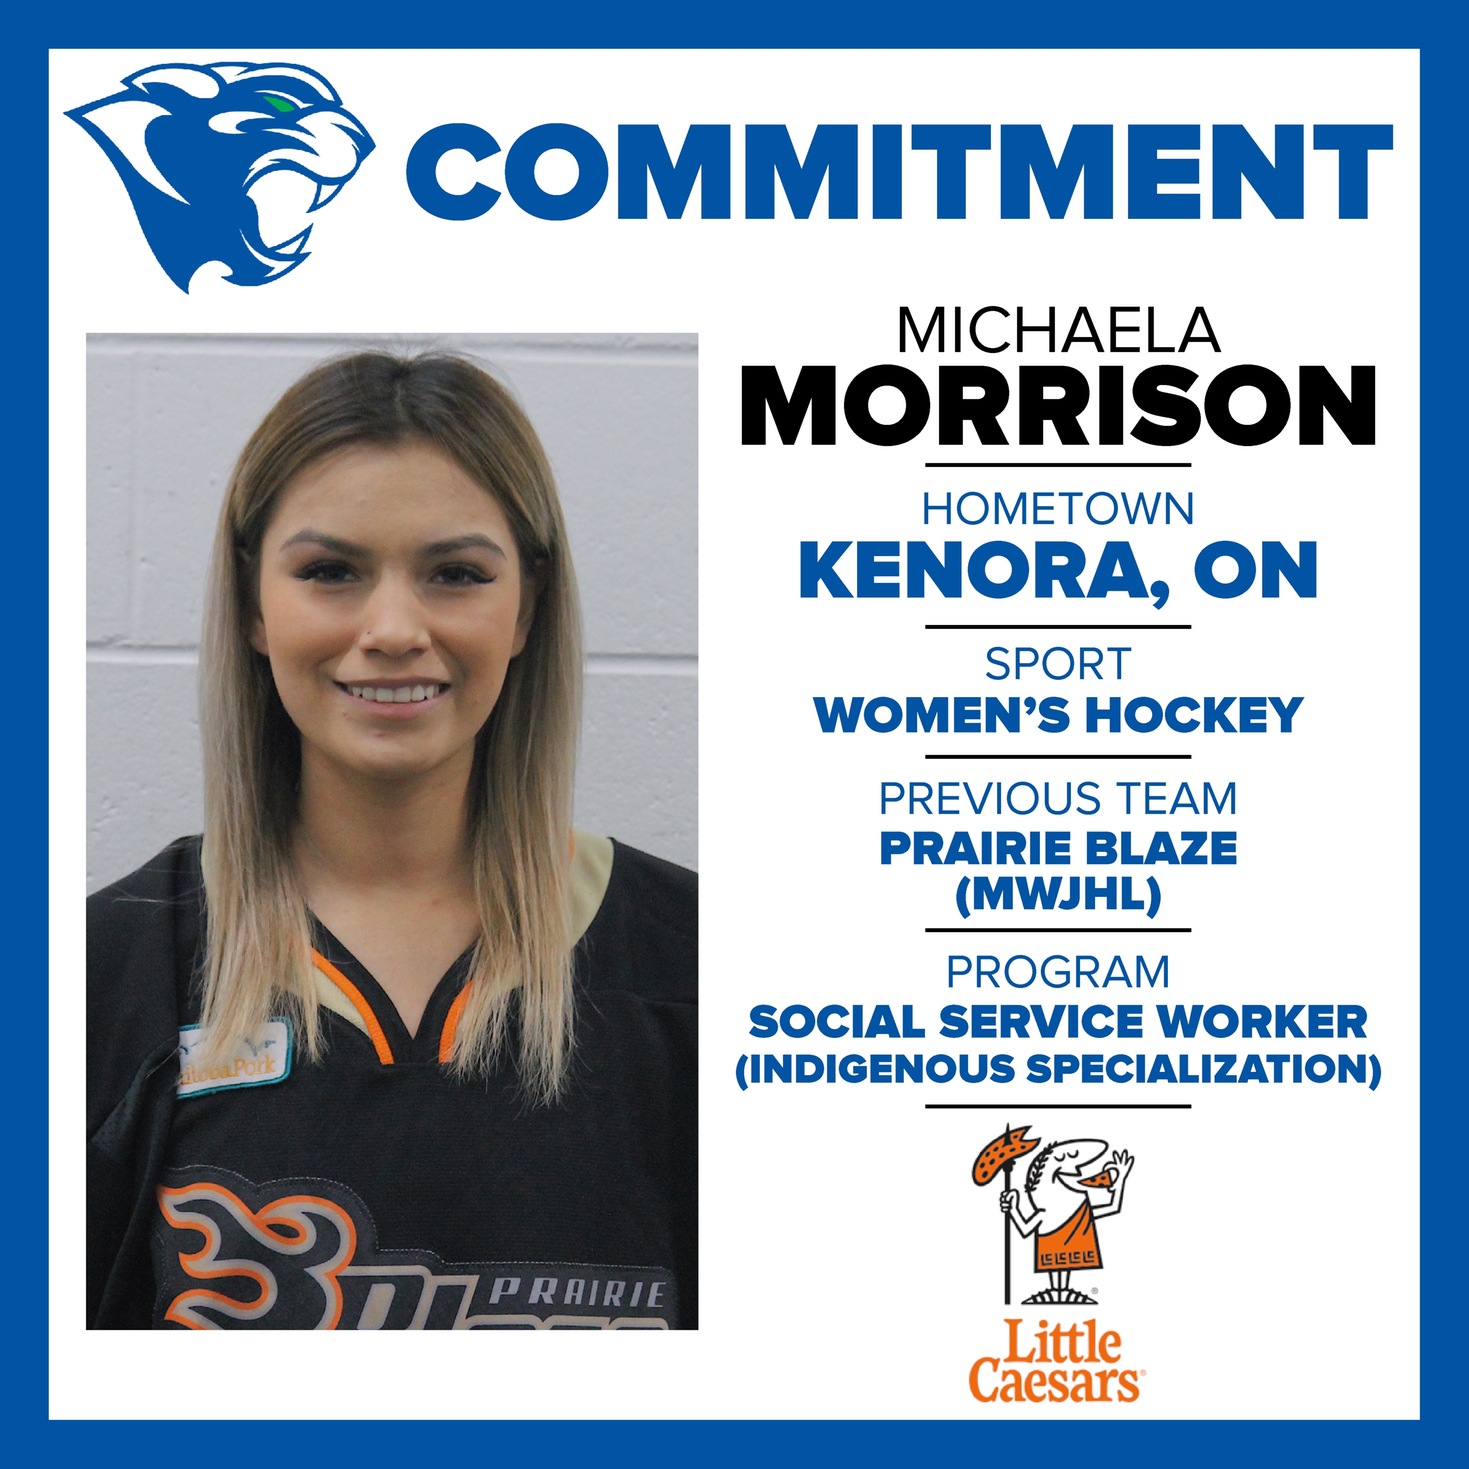 Cougars are excited to announce Michaela Morrison has committed to Women's Hockey